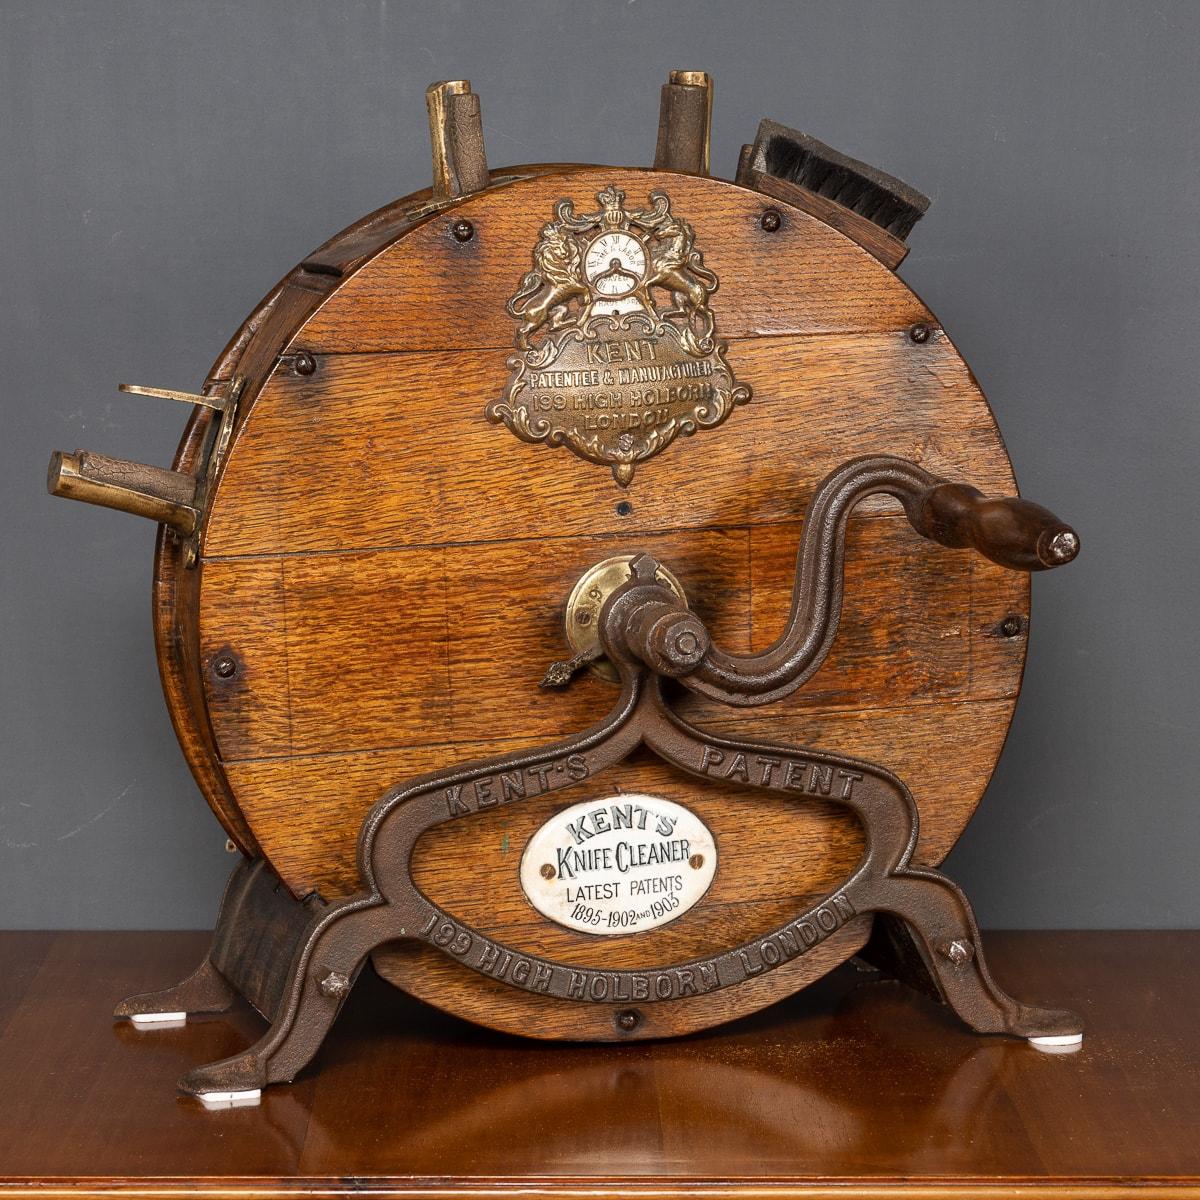 Antique 19th century Victorian knife sharpening and cleaning machine, manufactured by Kent's of London England. The machine consists of two whetstones in a solid oak casing with a heavy cast iron handle and sits on a heavy cast iron base. The top of